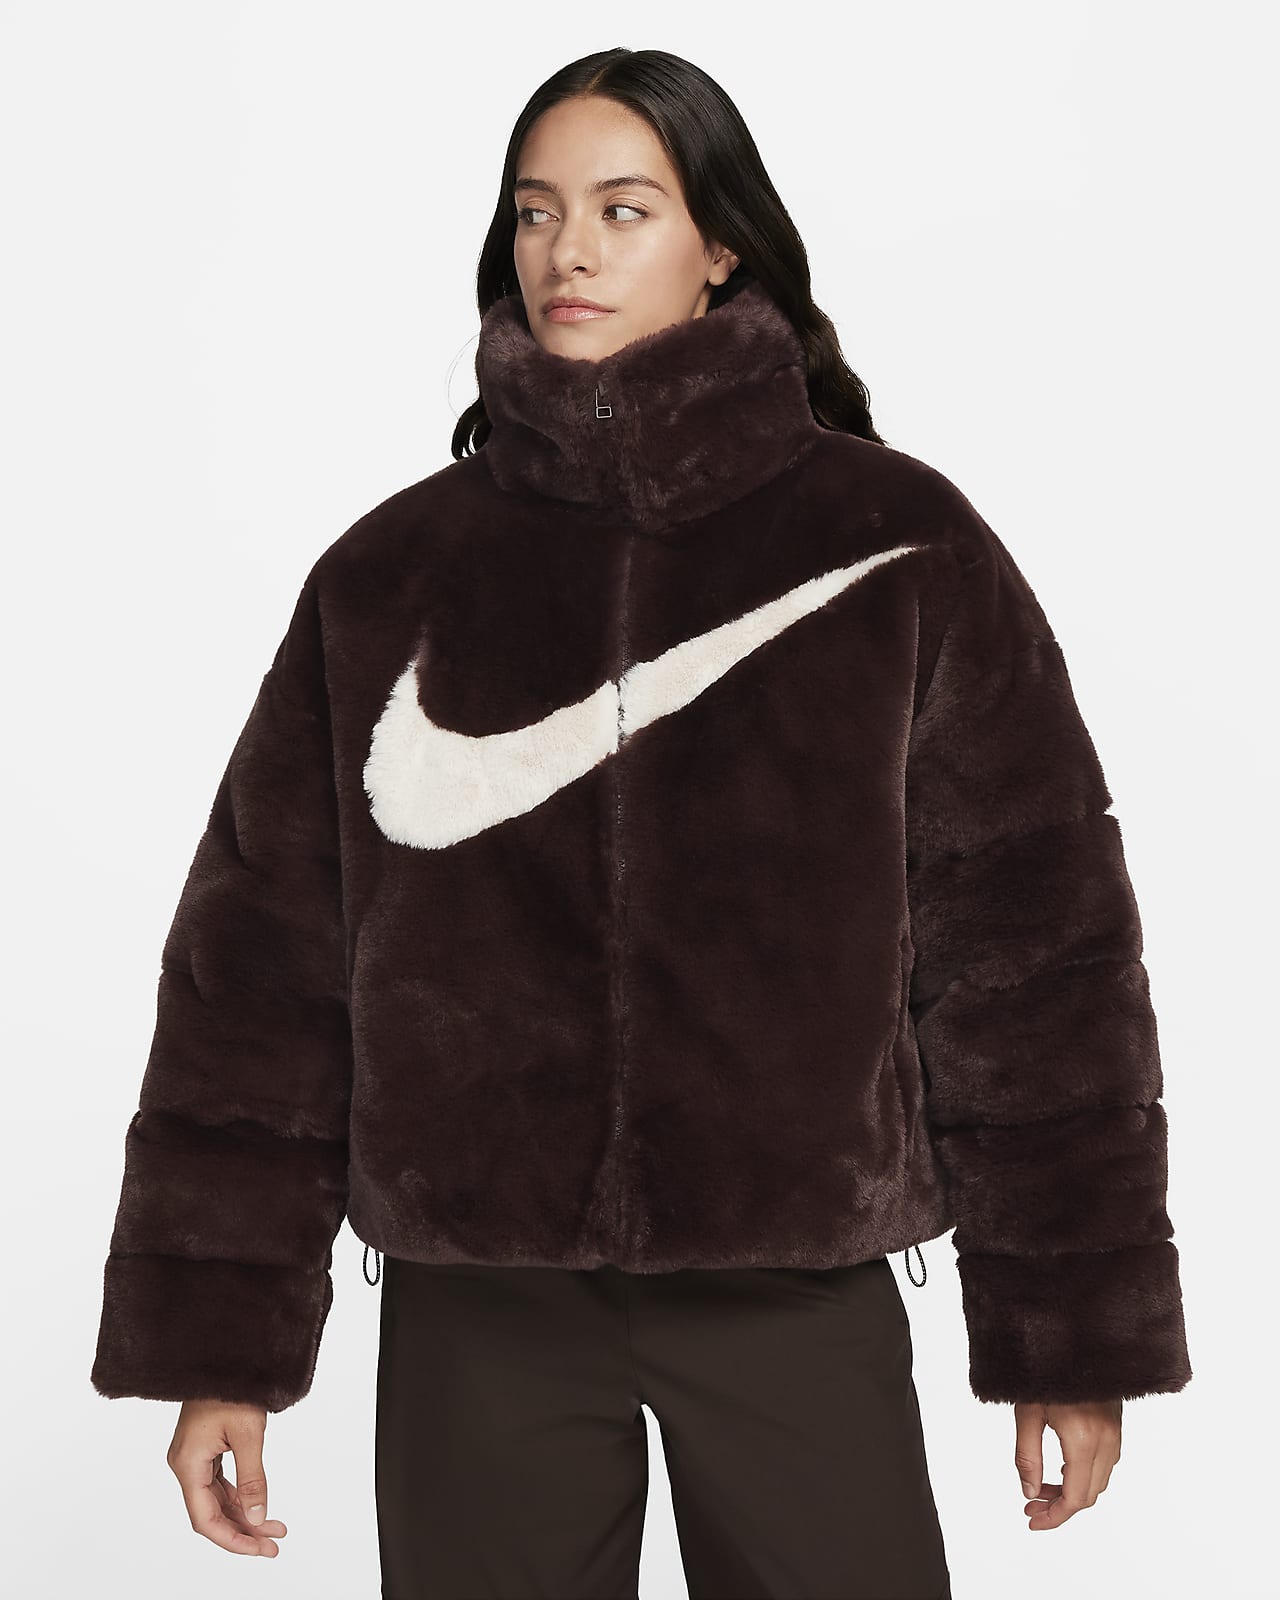 Nike Launches New Big Swoosh Faux Fur Jackets for Fall